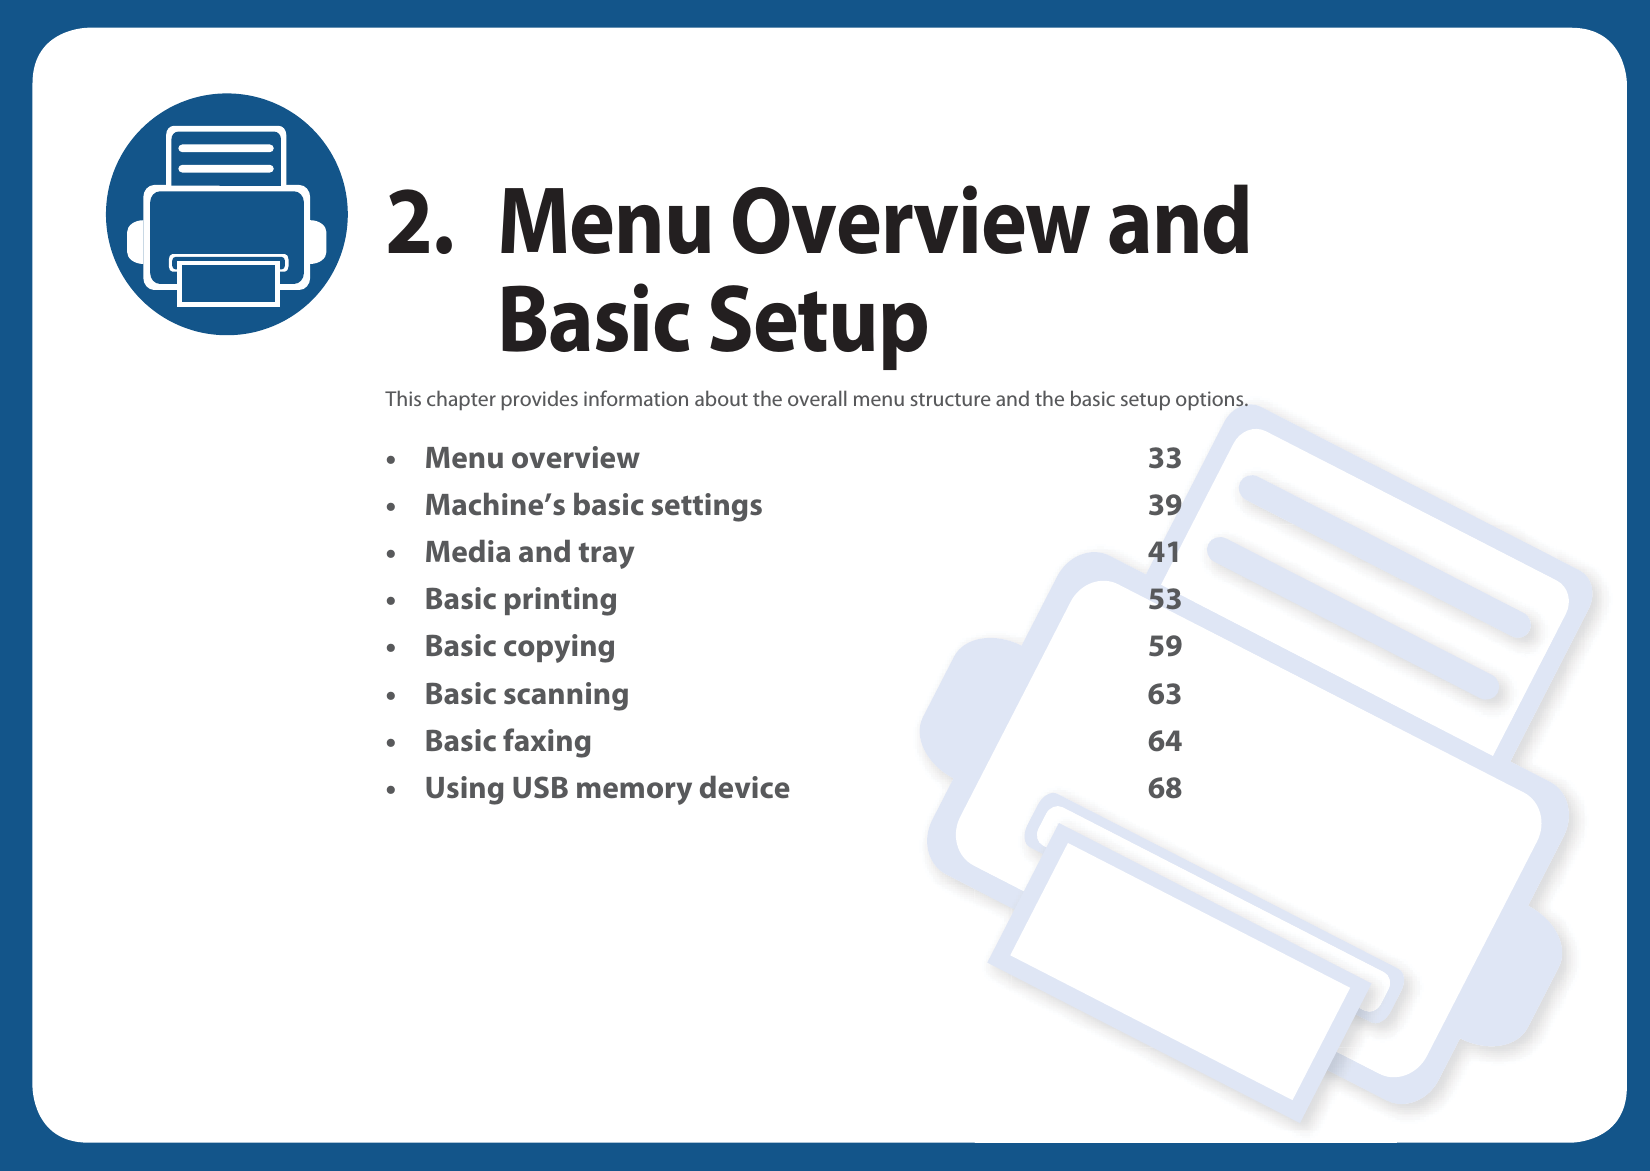 2. Menu Overview and Basic SetupThis chapter provides information about the overall menu structure and the basic setup options.• Menu overview 33• Machine’s basic settings 39• Media and tray 41• Basic printing 53• Basic copying 59• Basic scanning 63• Basic faxing 64• Using USB memory device 68